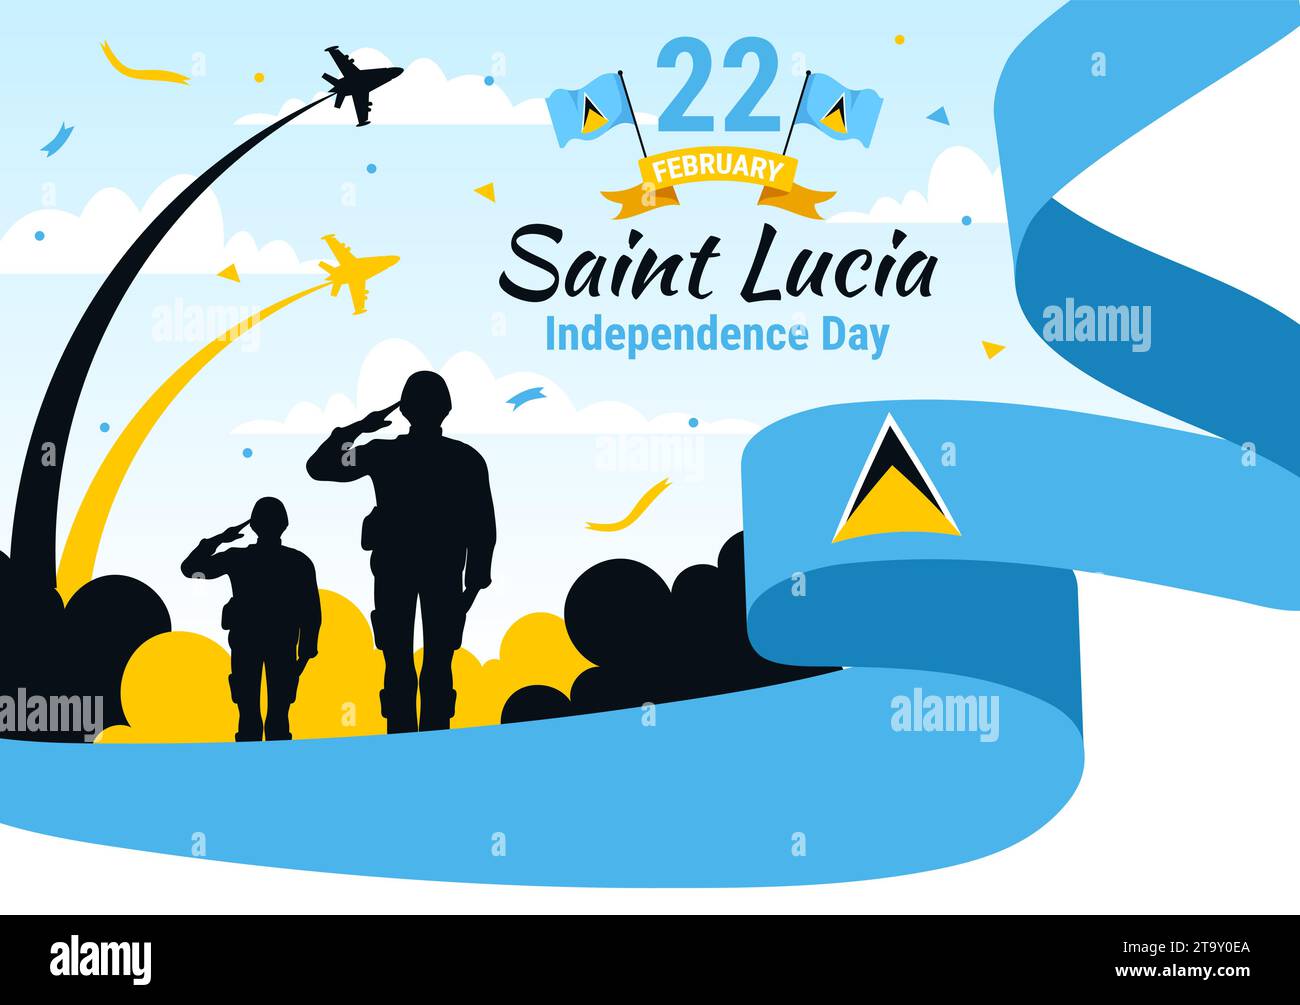 Saint Lucia Independence Day Vector Illustration on February 22 with Waving Flag in National Holiday Celebration Flat Cartoon Background Design Stock Vector